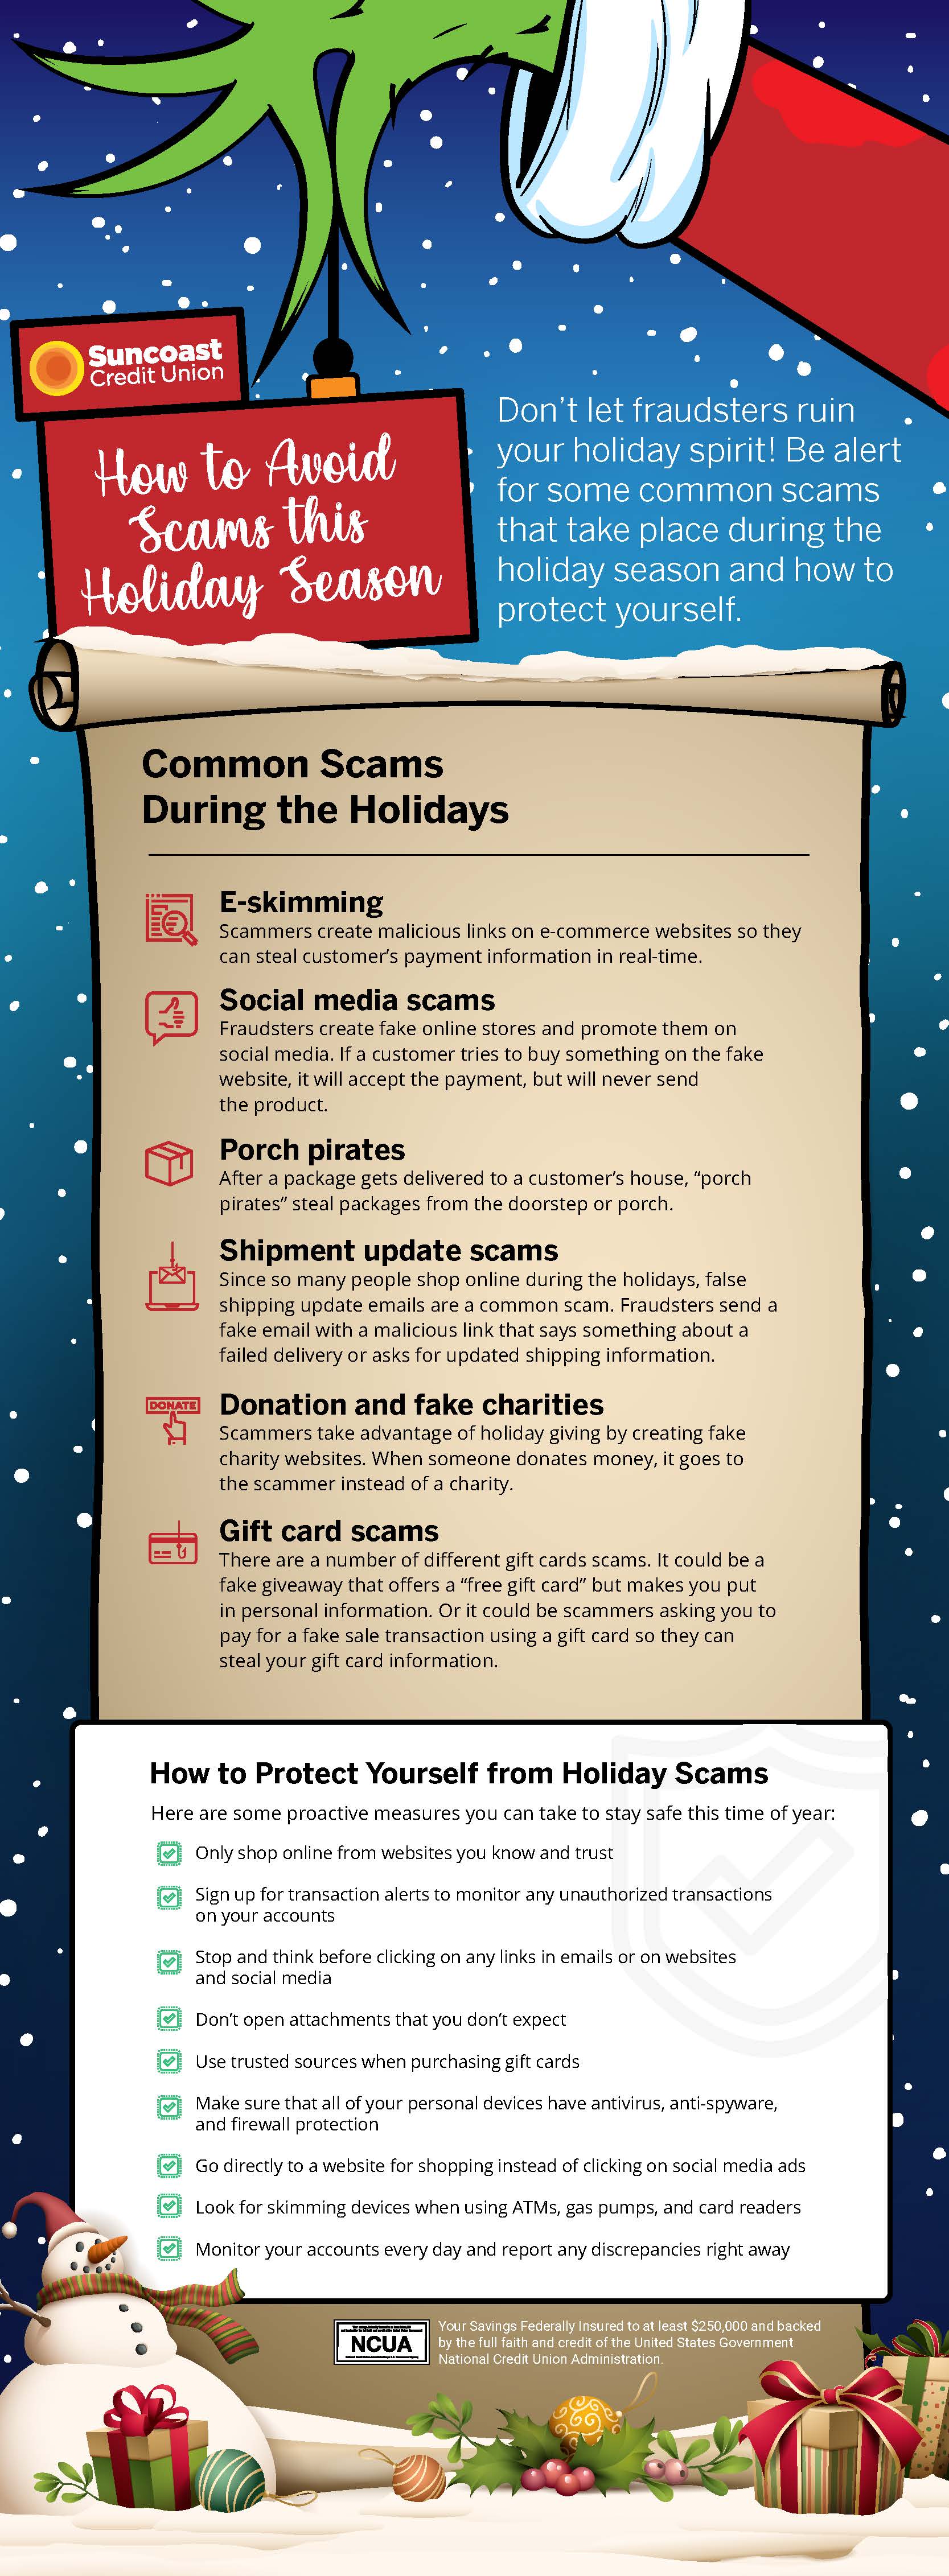 How to avoid scams this holiday season infographic